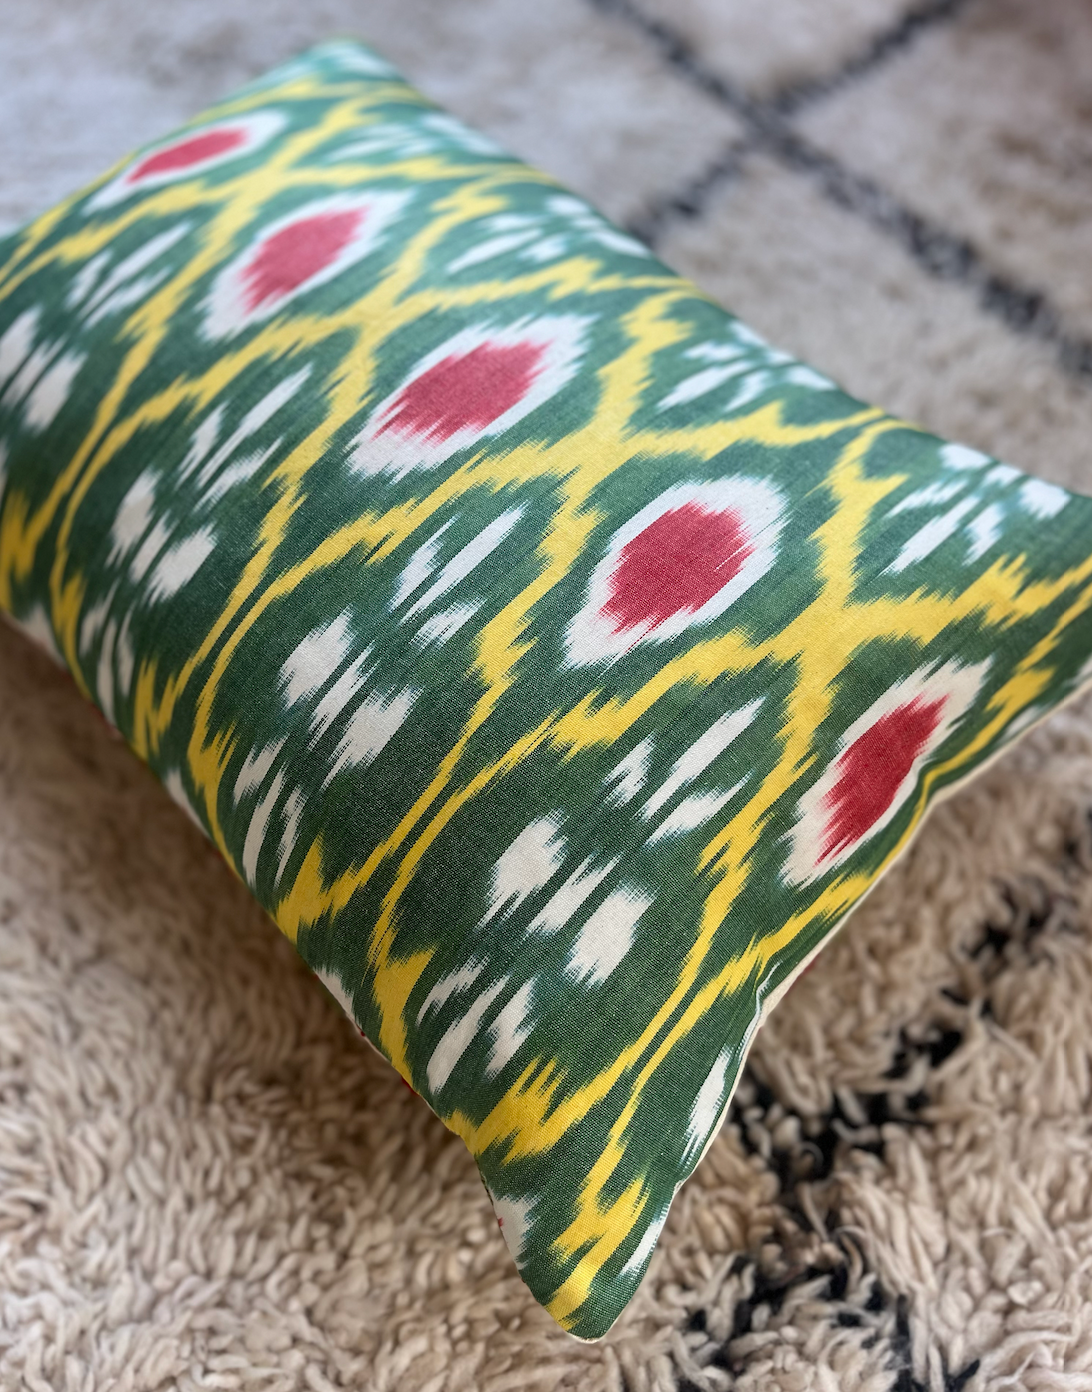 Green with Red Floral Silk Suzani Cushion